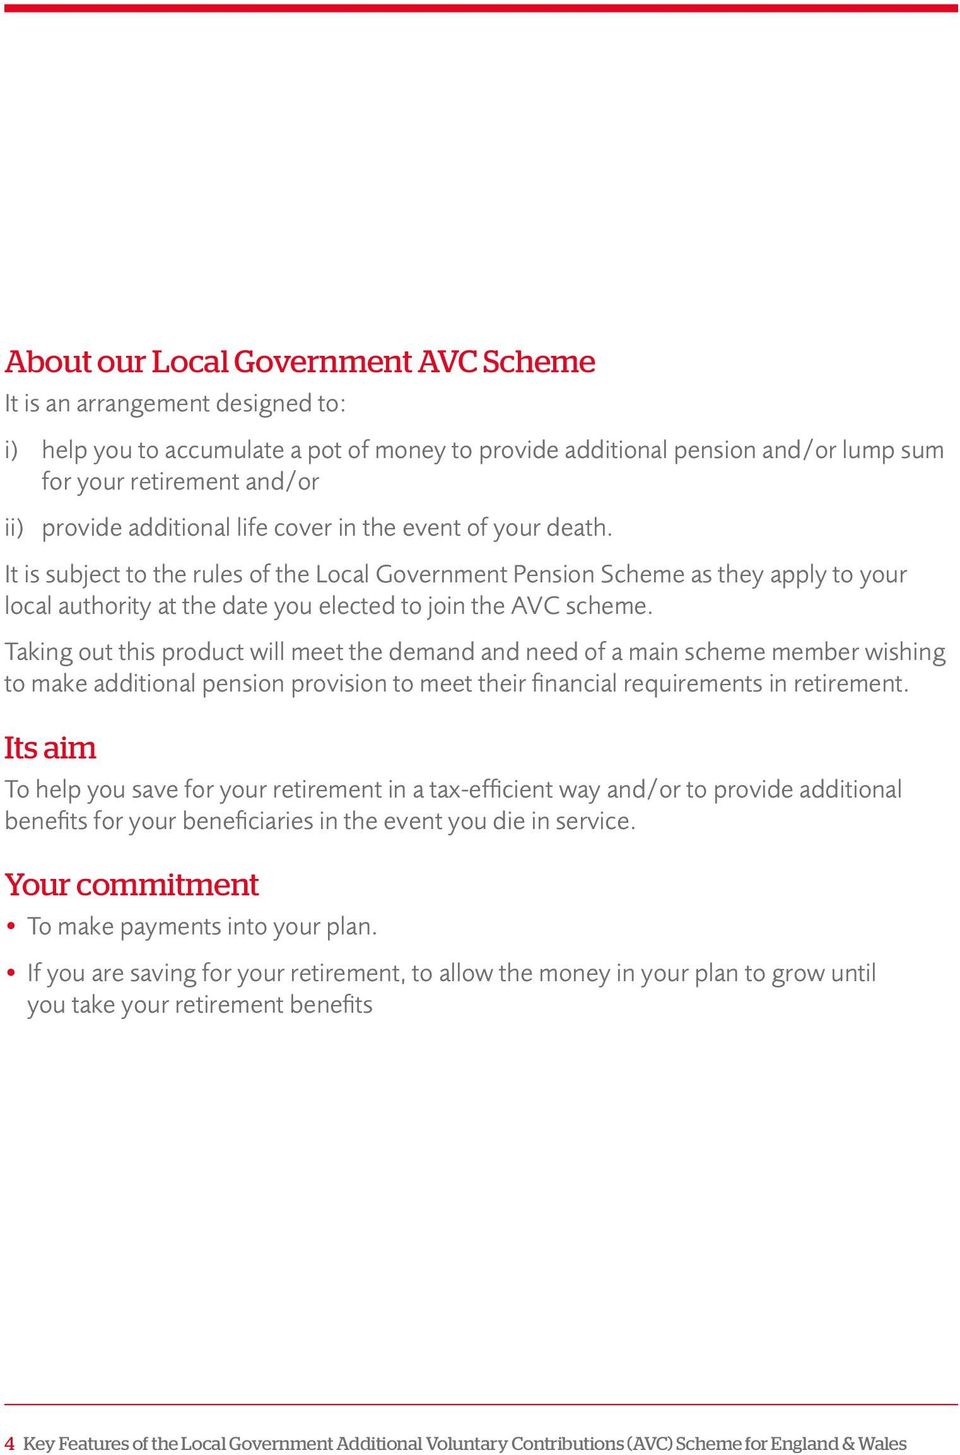 It is subject to the rules of the Local Government Pension Scheme as they apply to your local authority at the date you elected to join the AVC scheme.